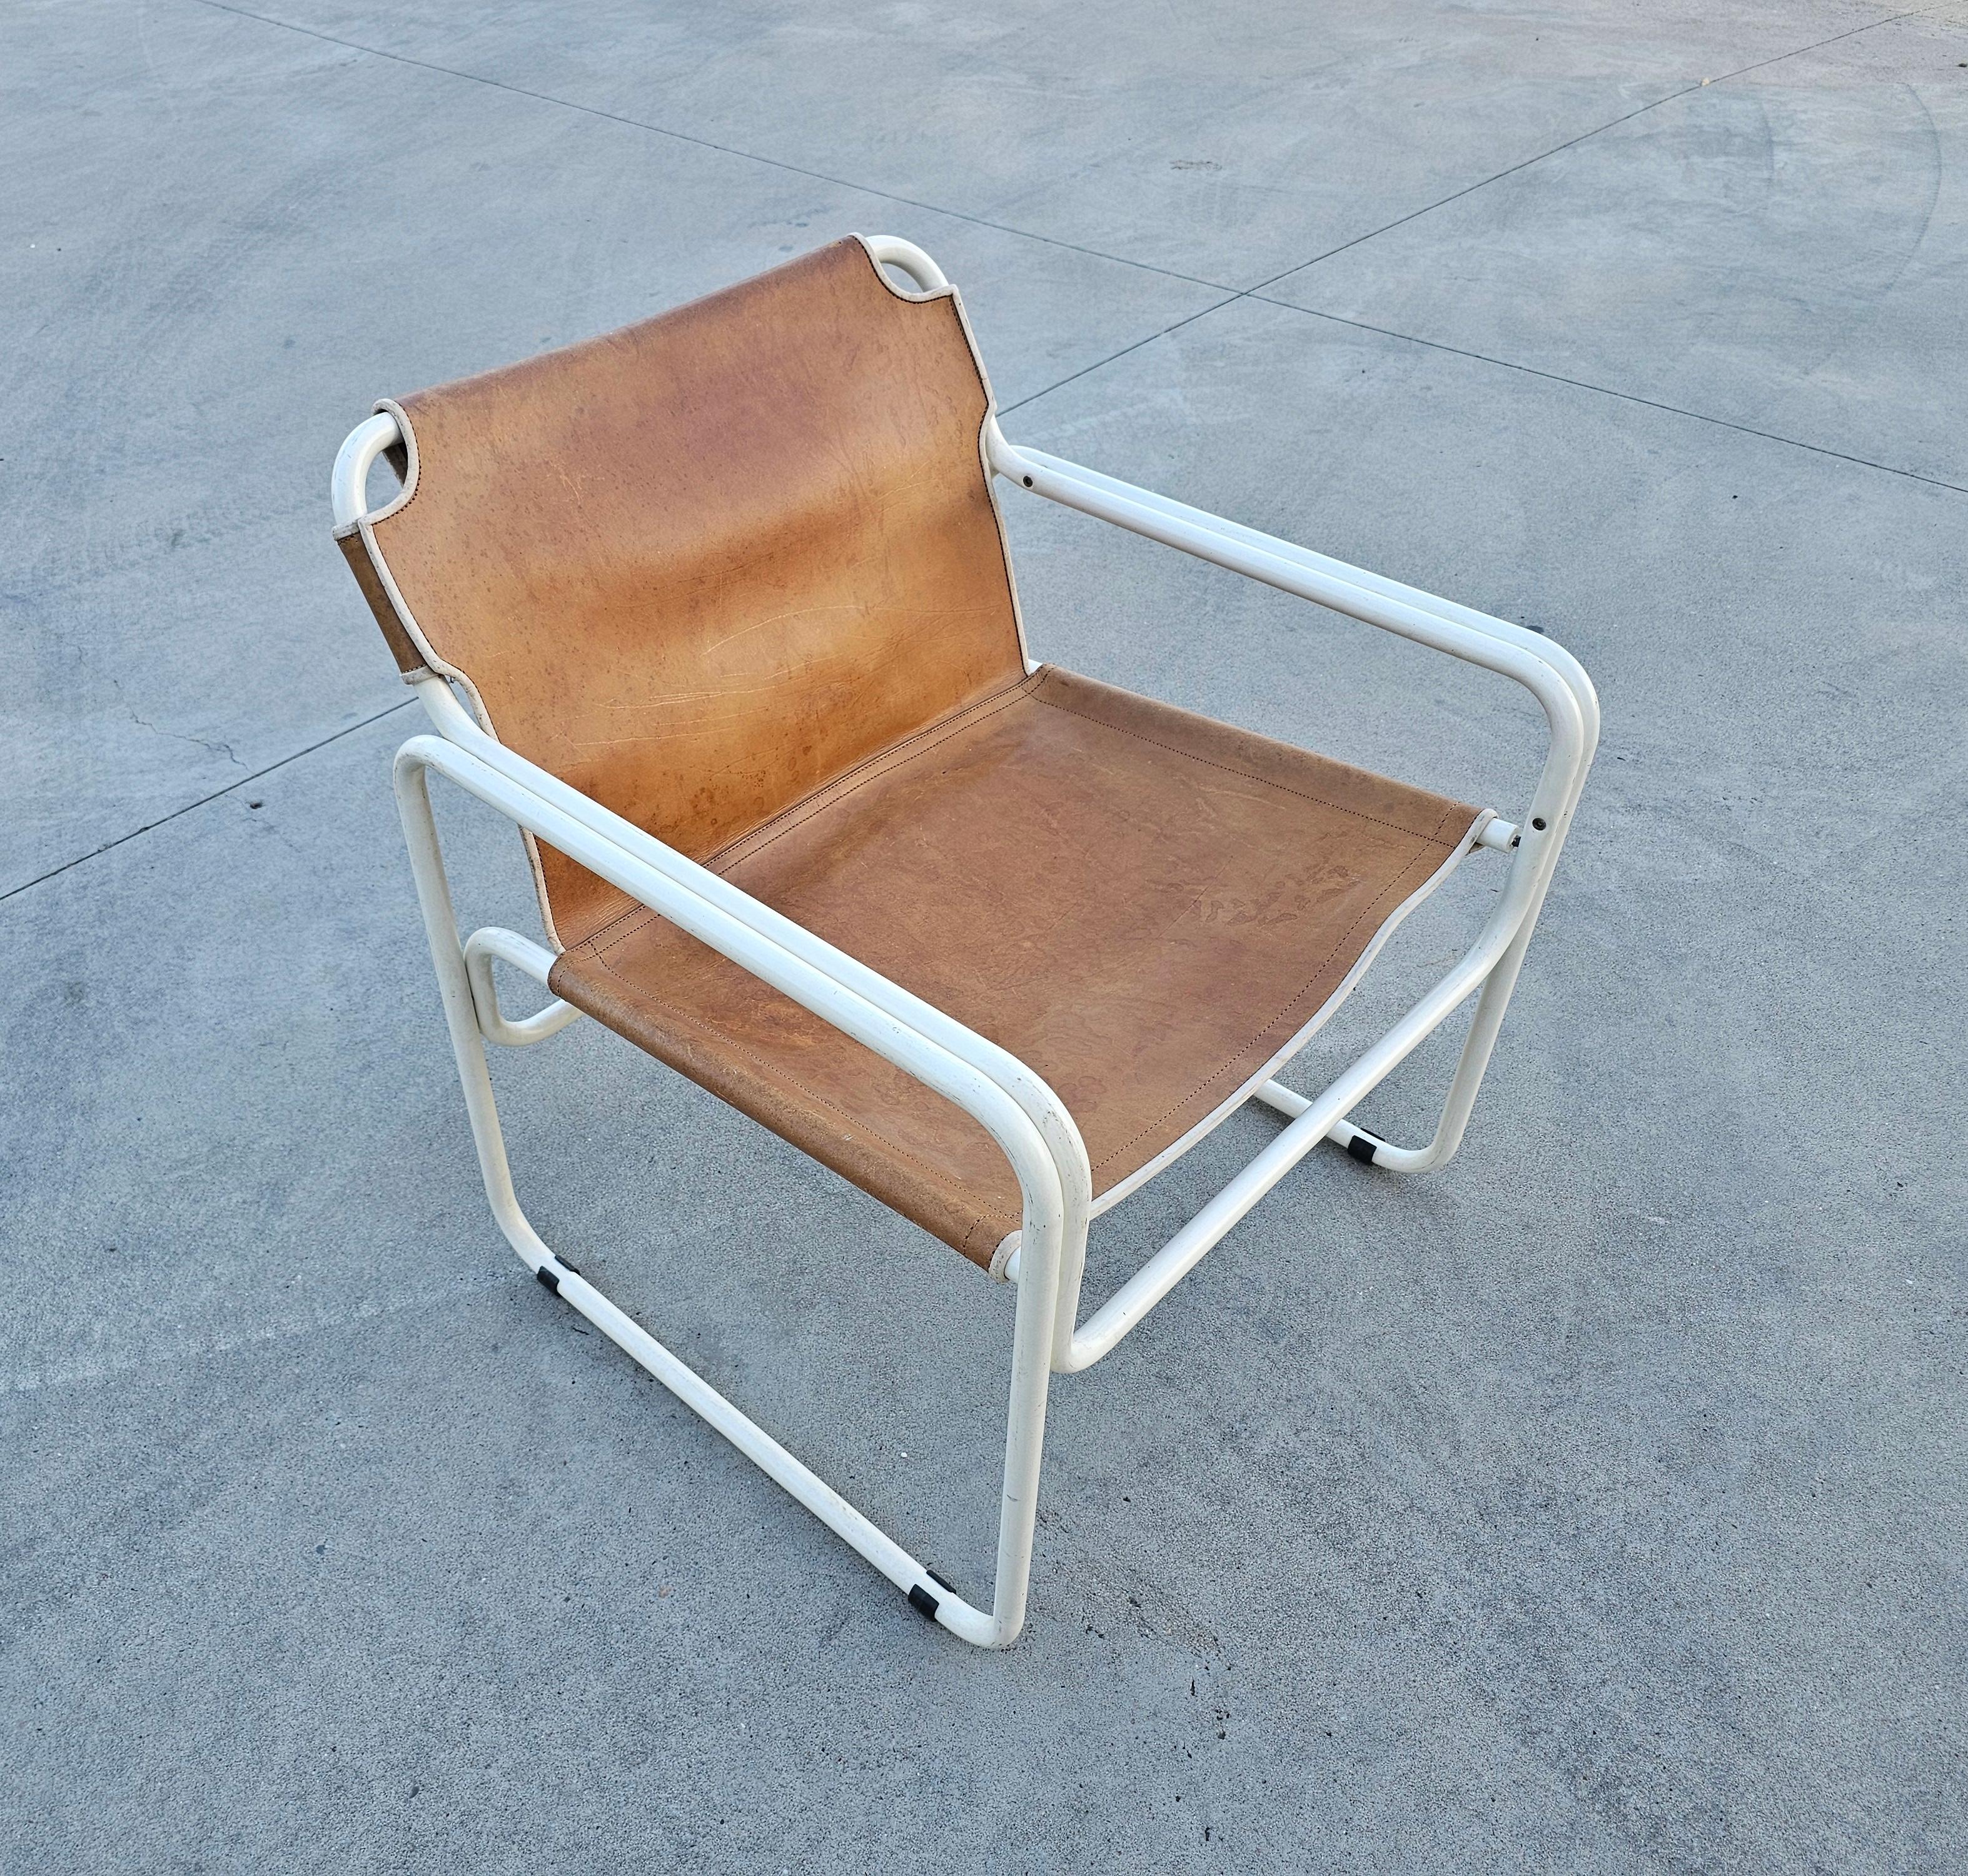 Bauhaus Style Tubular Easy Chairs in Cognac Leather by Jox Interni, 1970s For Sale 2